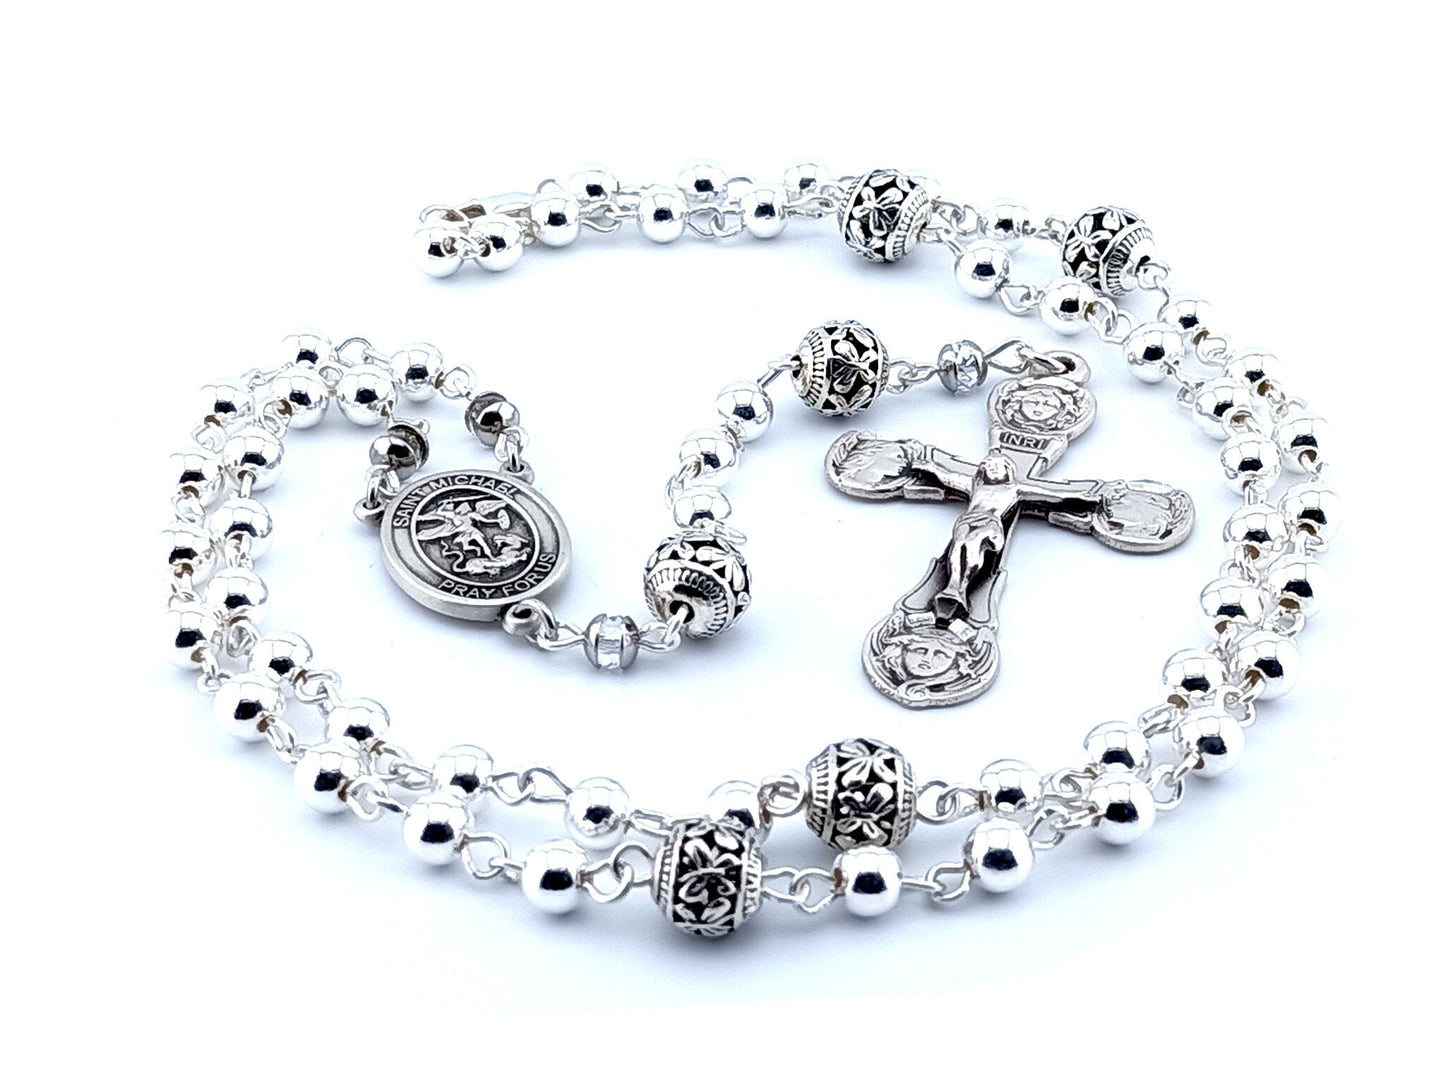 Saint Michael unique rosary beads genuine 925 sterling silver rosary with sterling silver beads, crucifix, centre medal and wire.